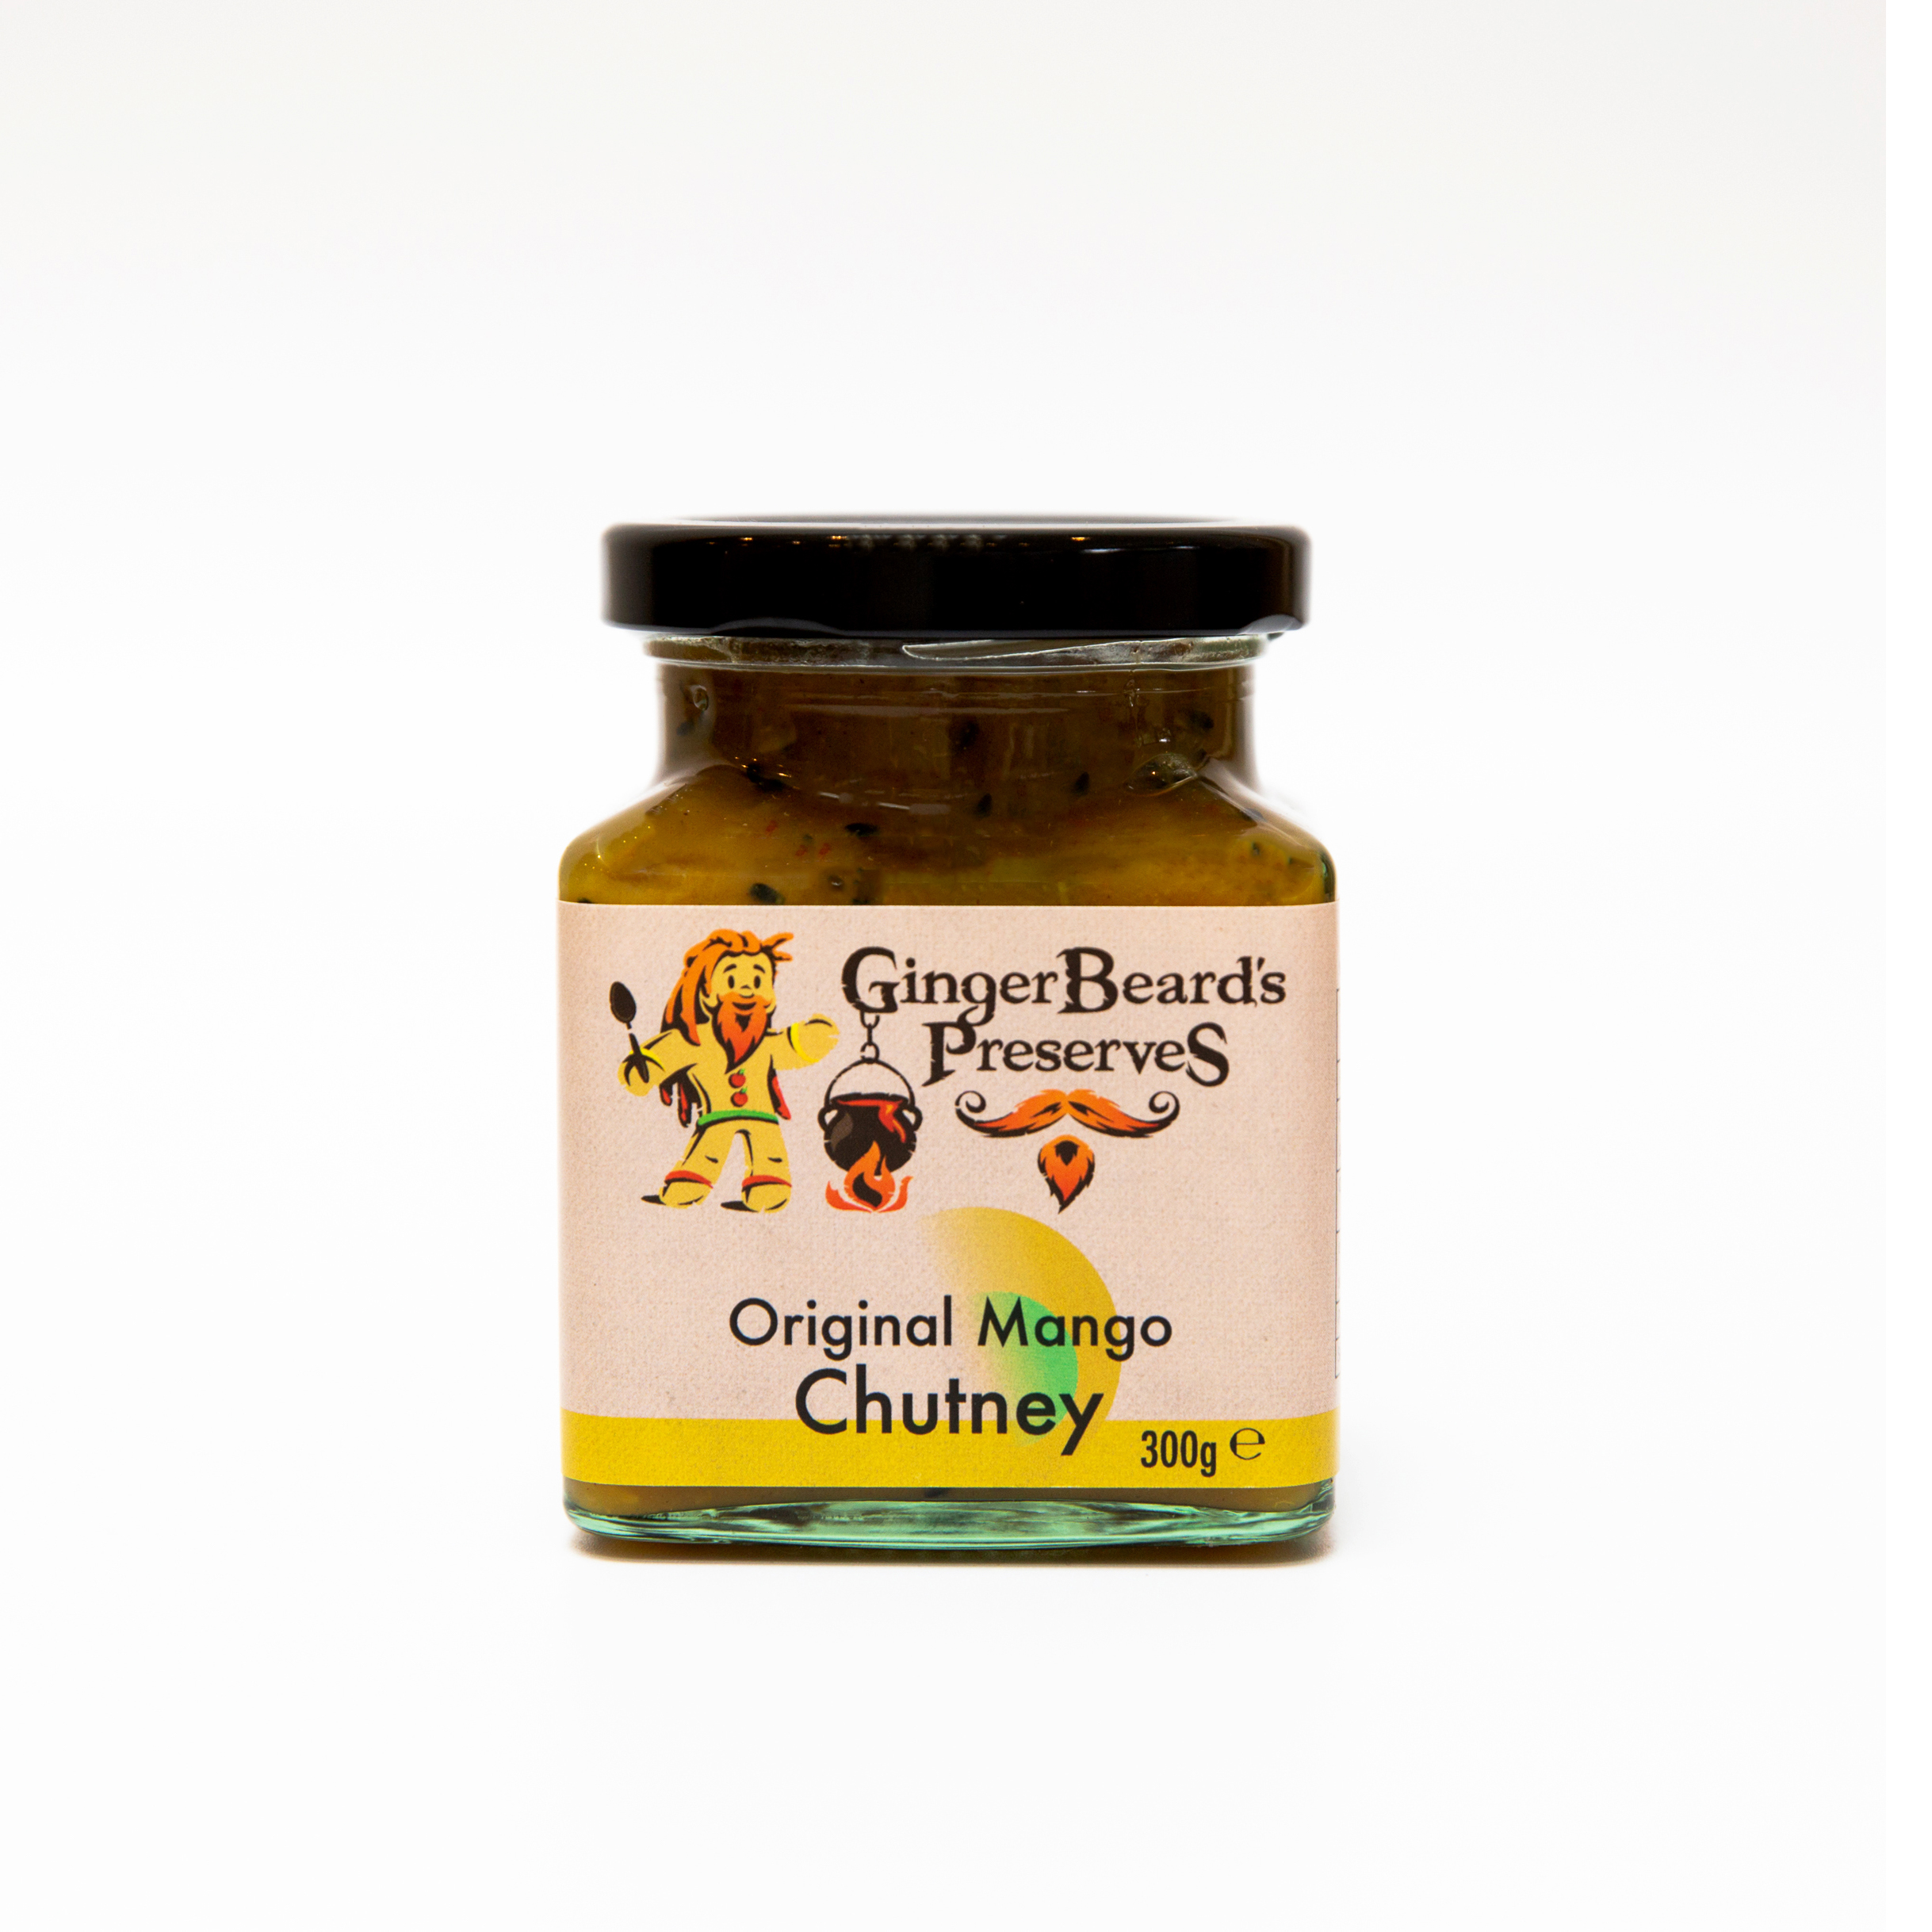 Delicious chutney by Ginger Beard Preserves